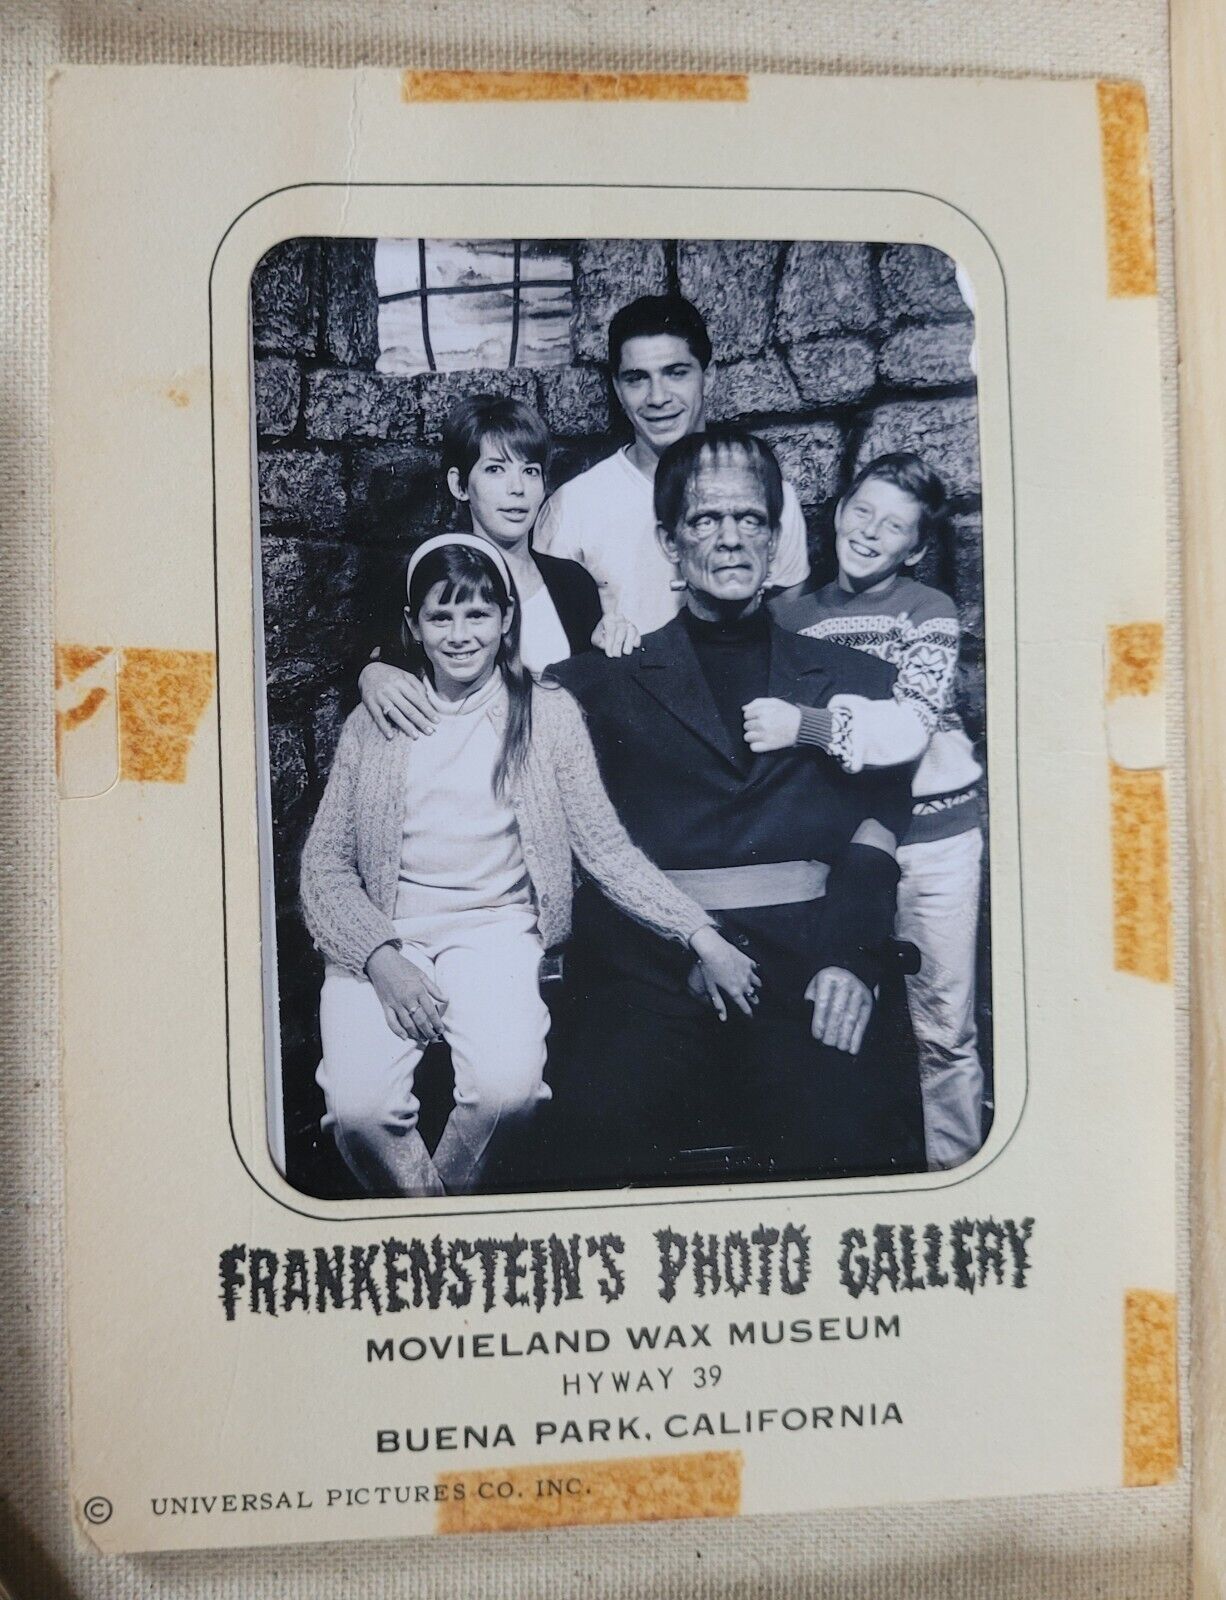 Inappropriate Vintage Frankenstein Photo Check Out Girl\'s Hand In His Lap